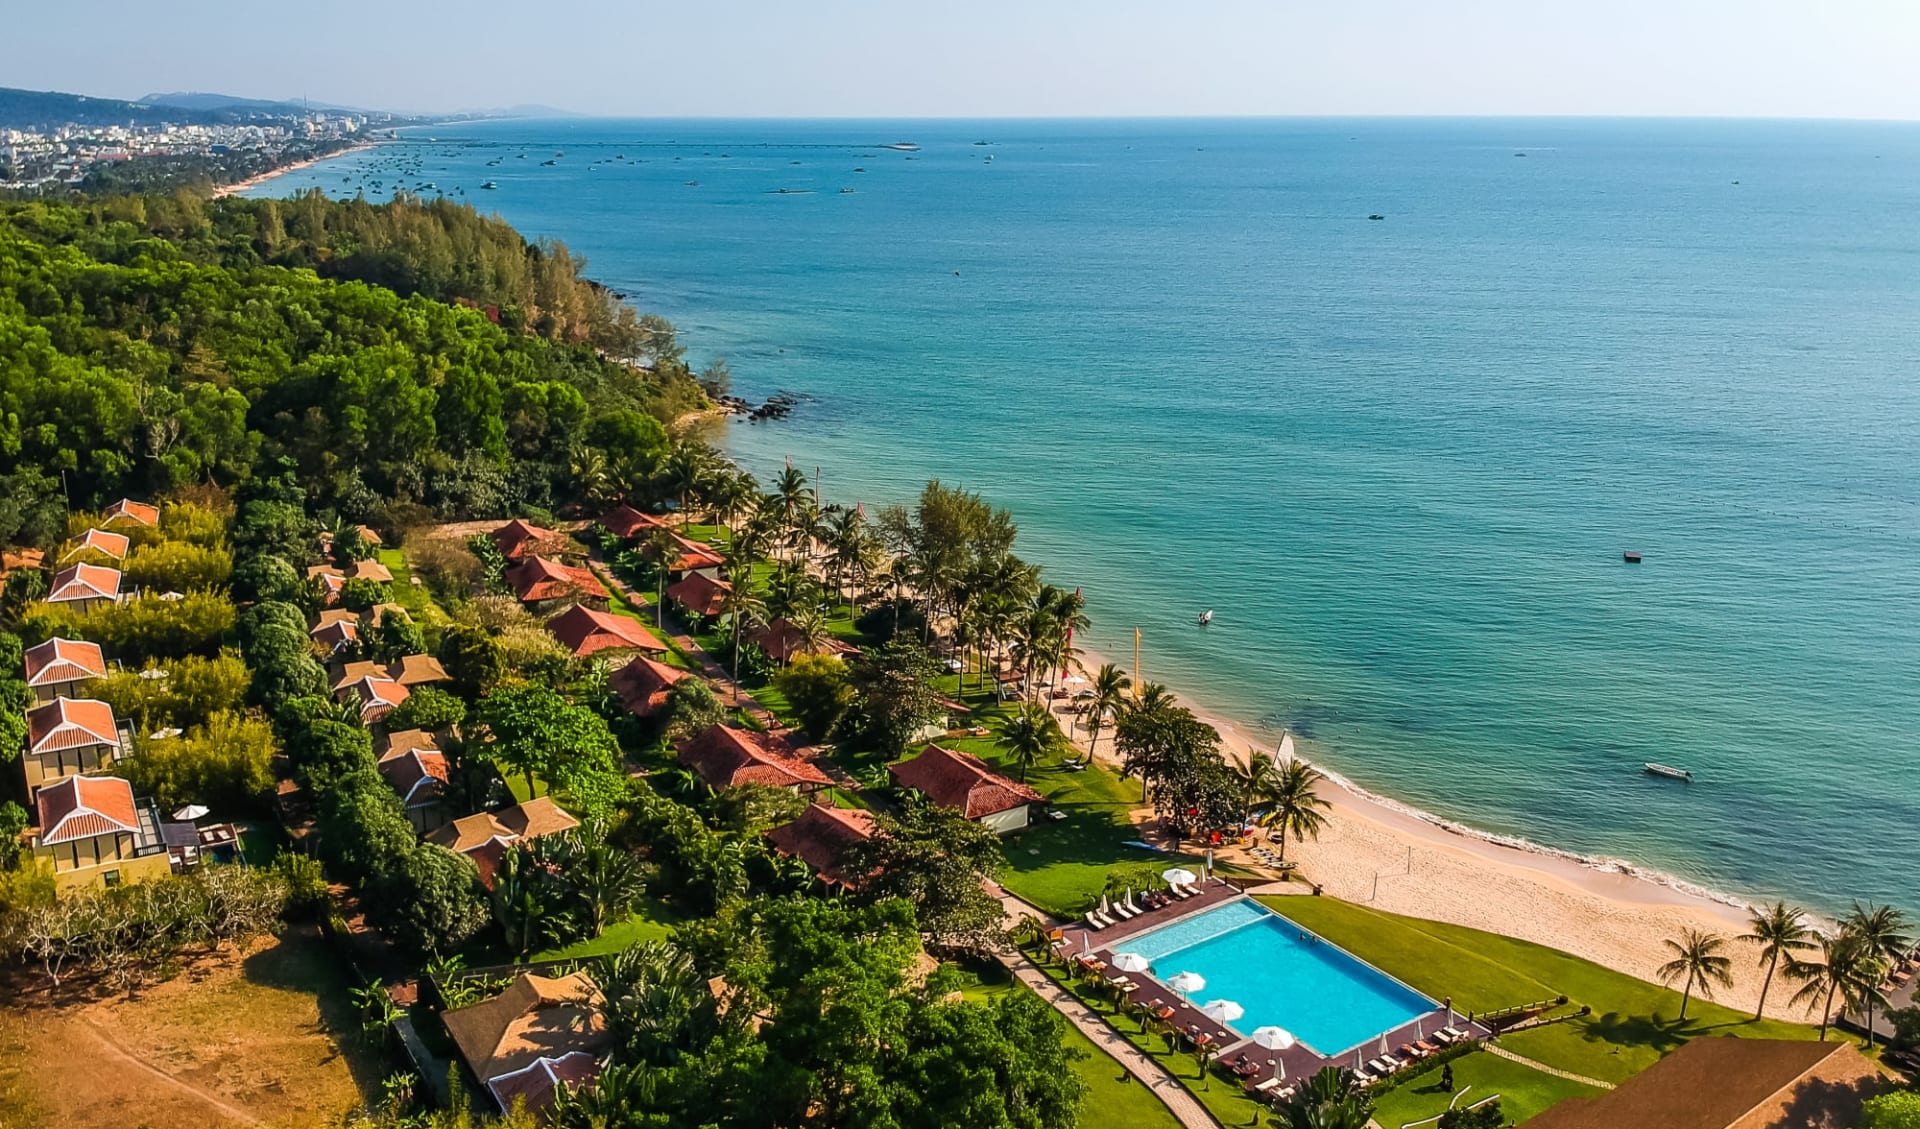 Chen Sea Resort & Spa in Phu Quoc: Overview